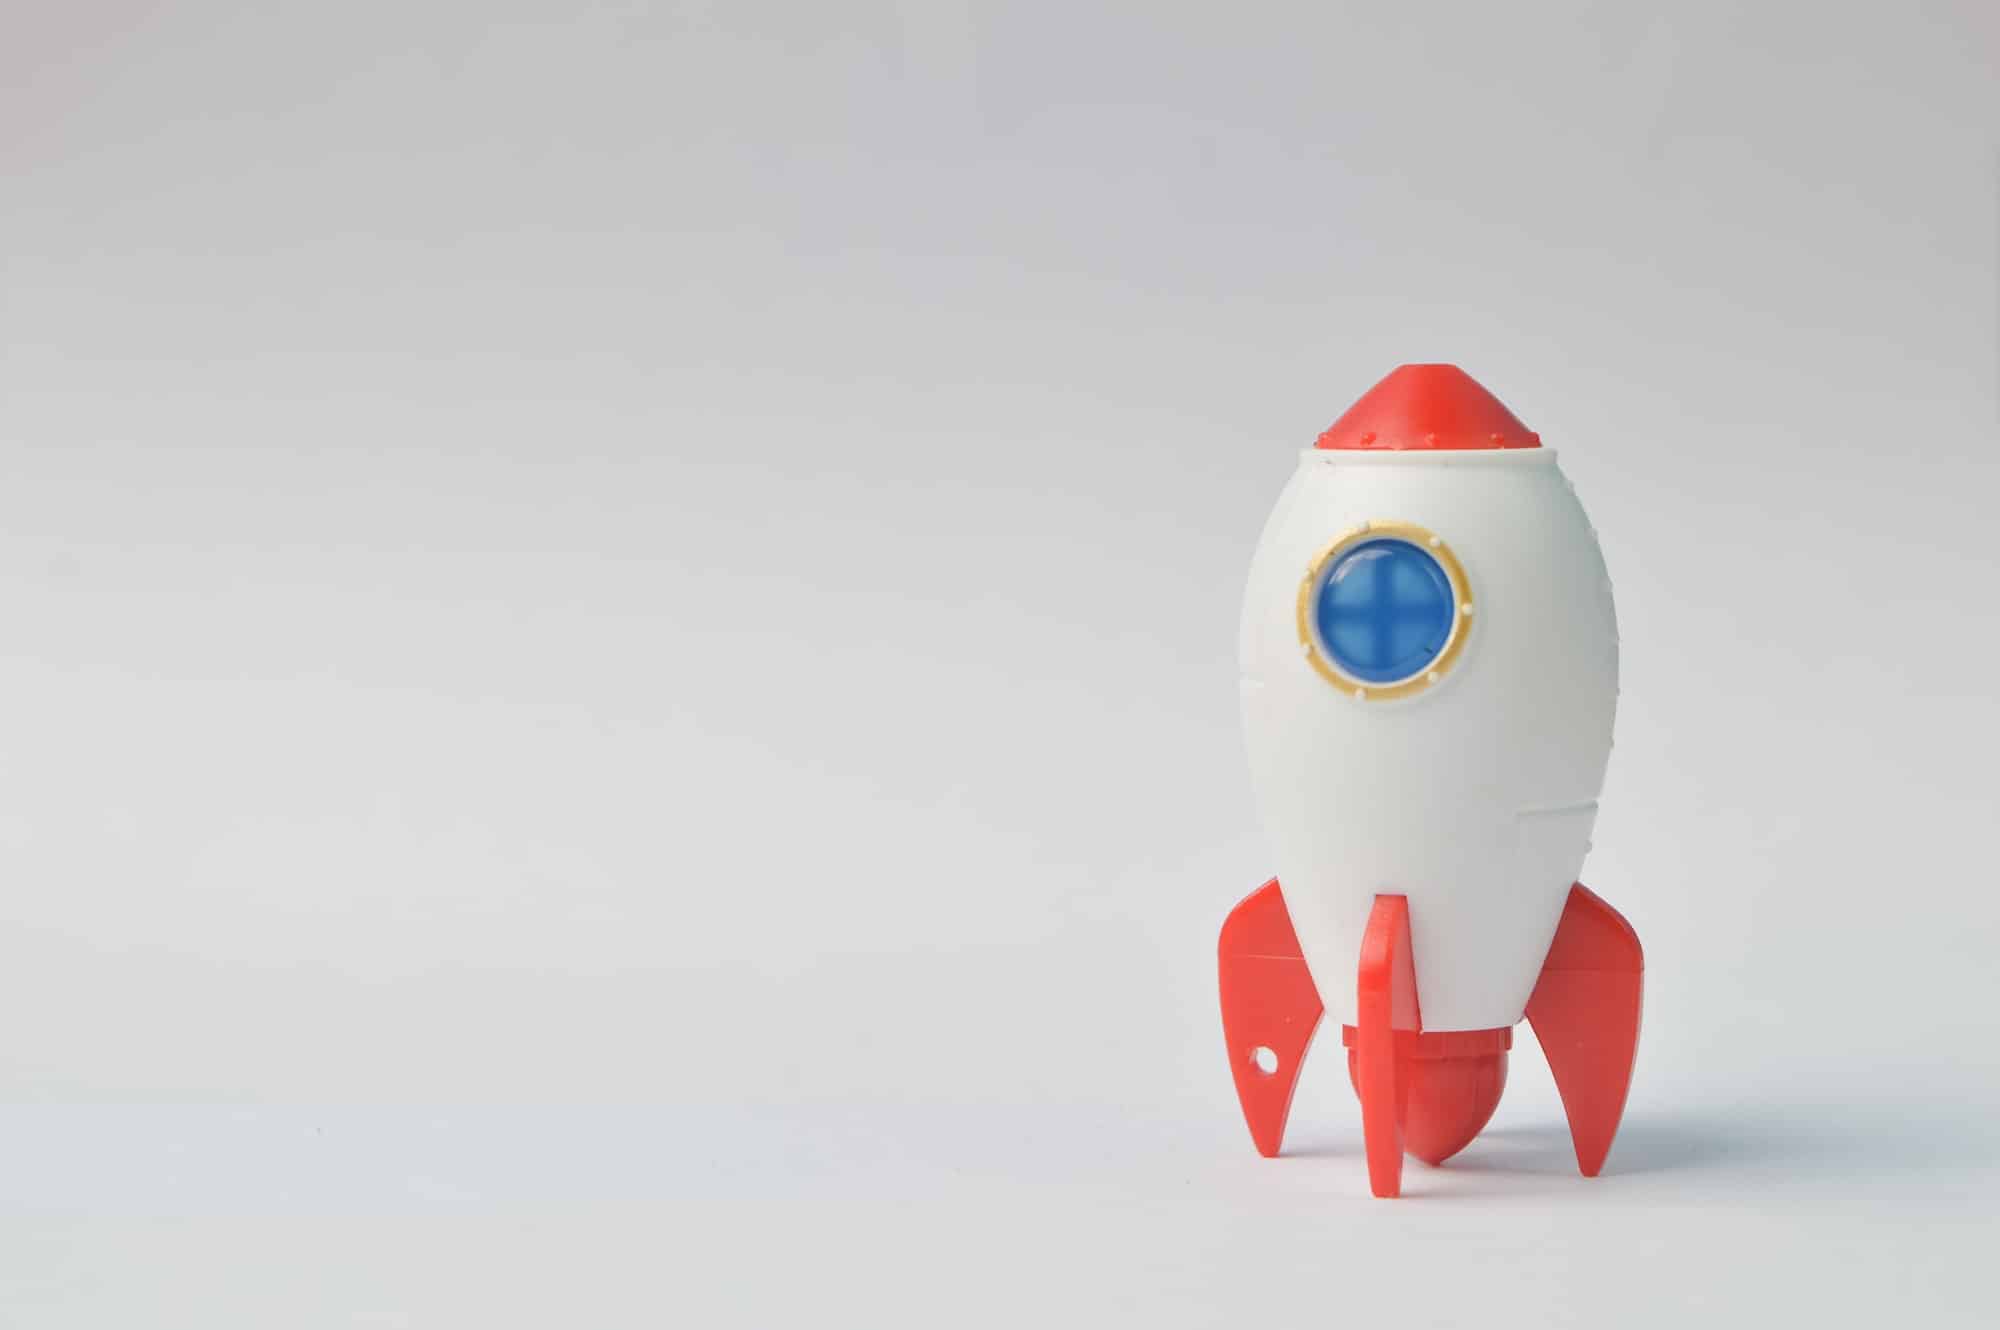 Toy rocket isolated on a white background